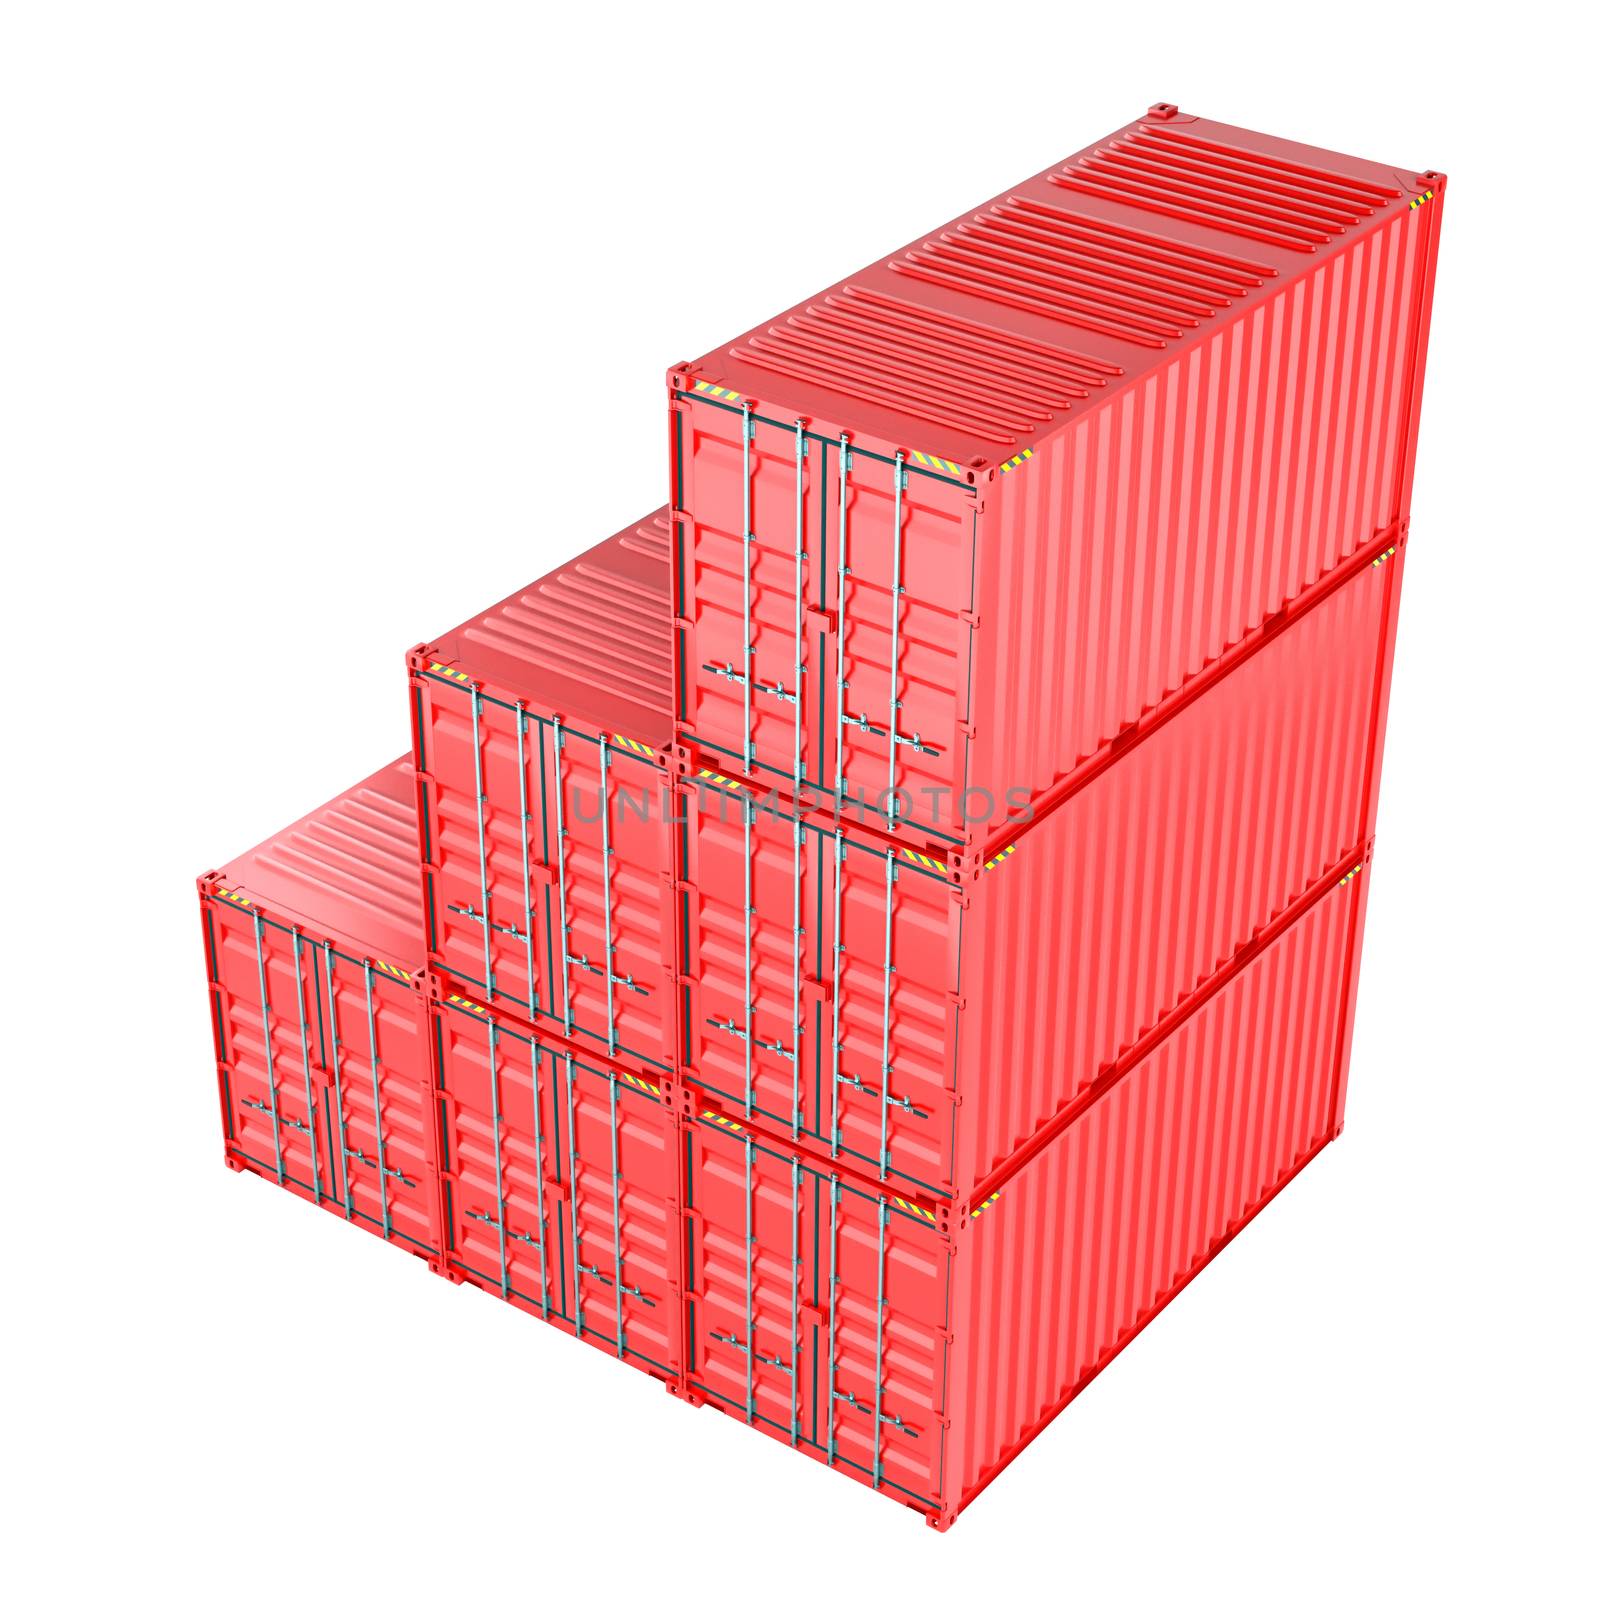 Stacked red cargo containers over white by cherezoff